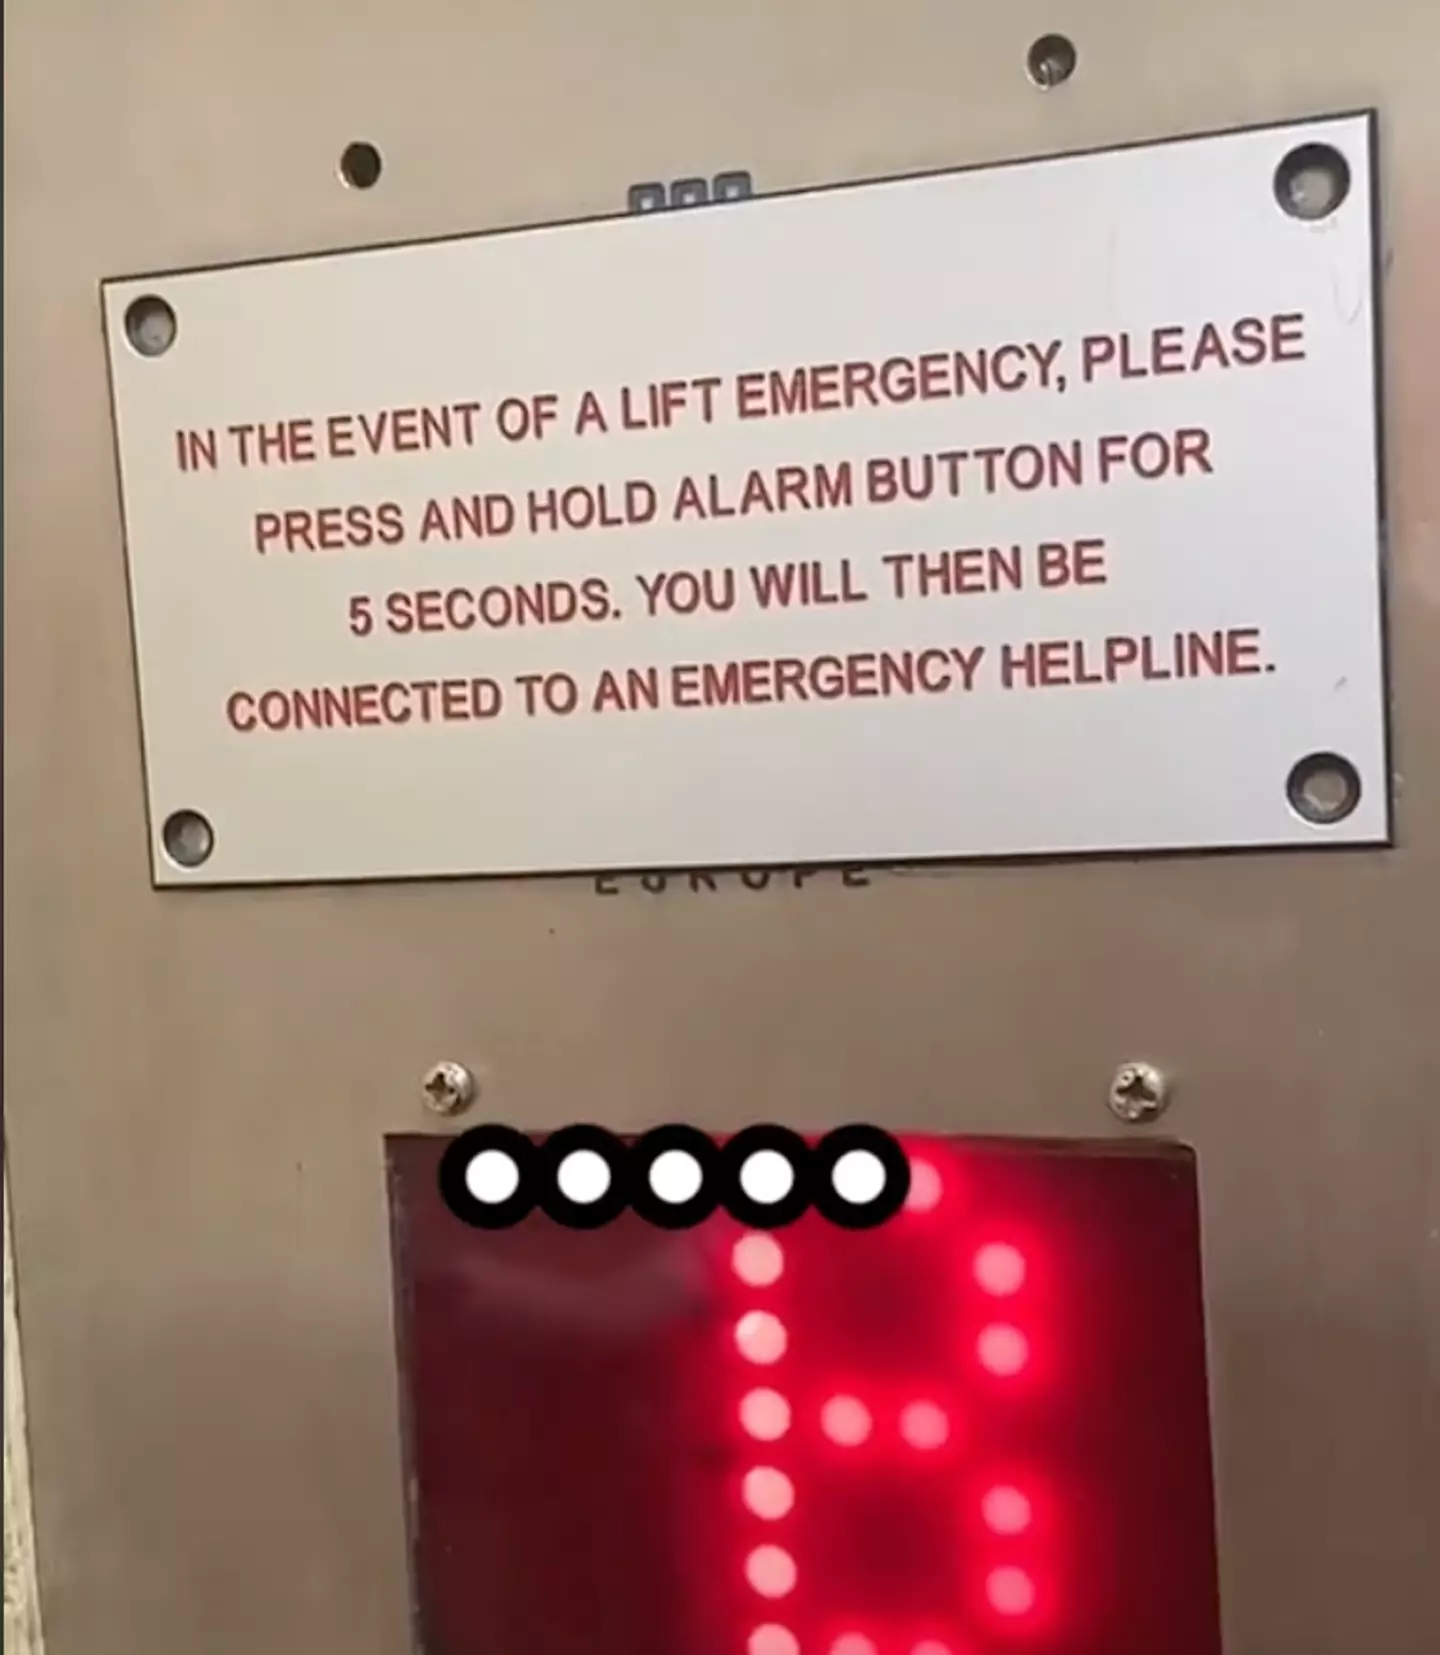 Jephta explained how the emergency protocol in a lift doesn't work for deaf people as it consists of pressing a button and sounding an alarm for five seconds.